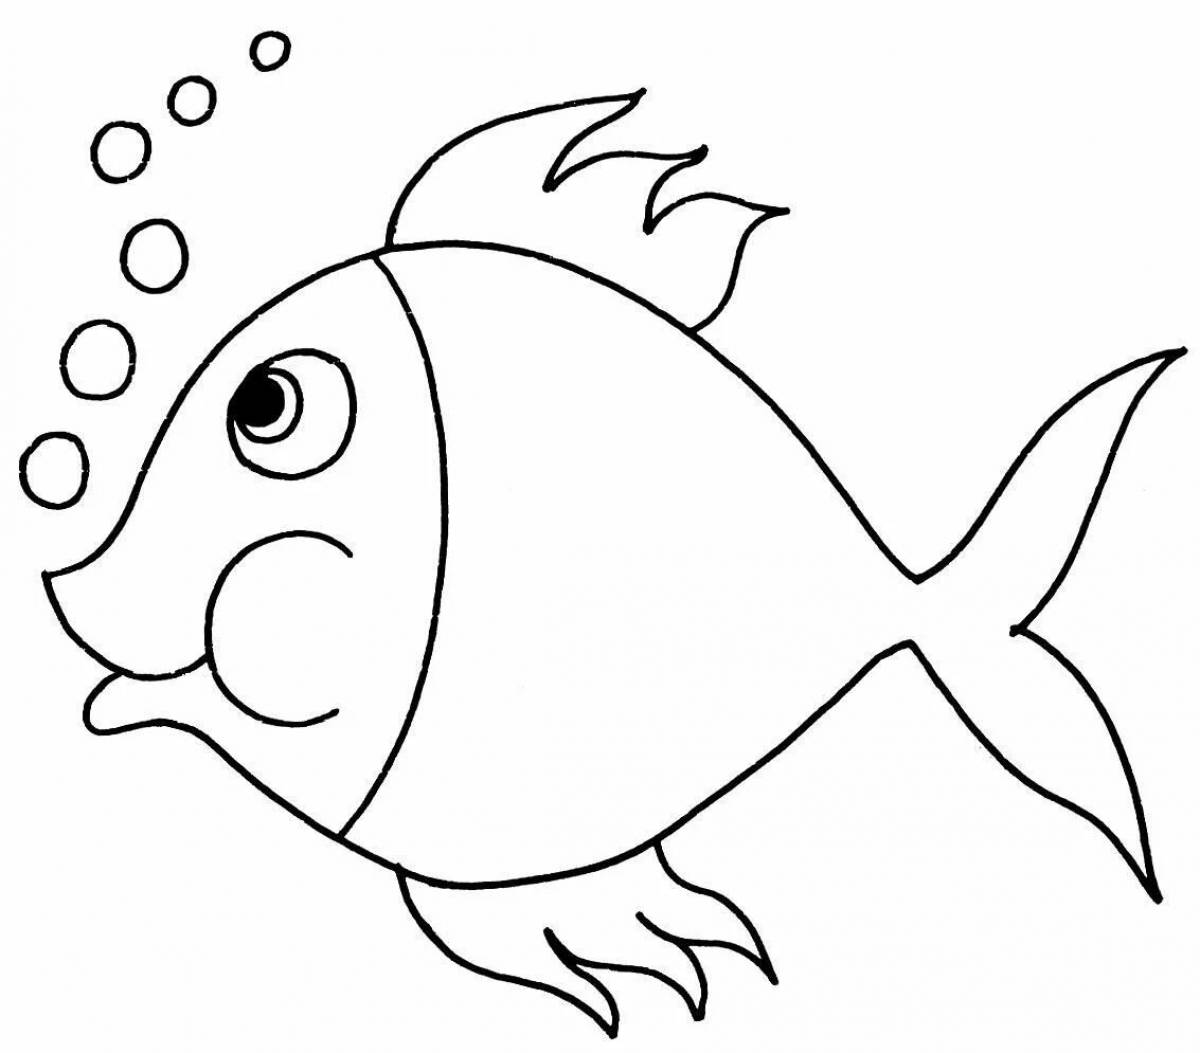 Calm fish coloring page